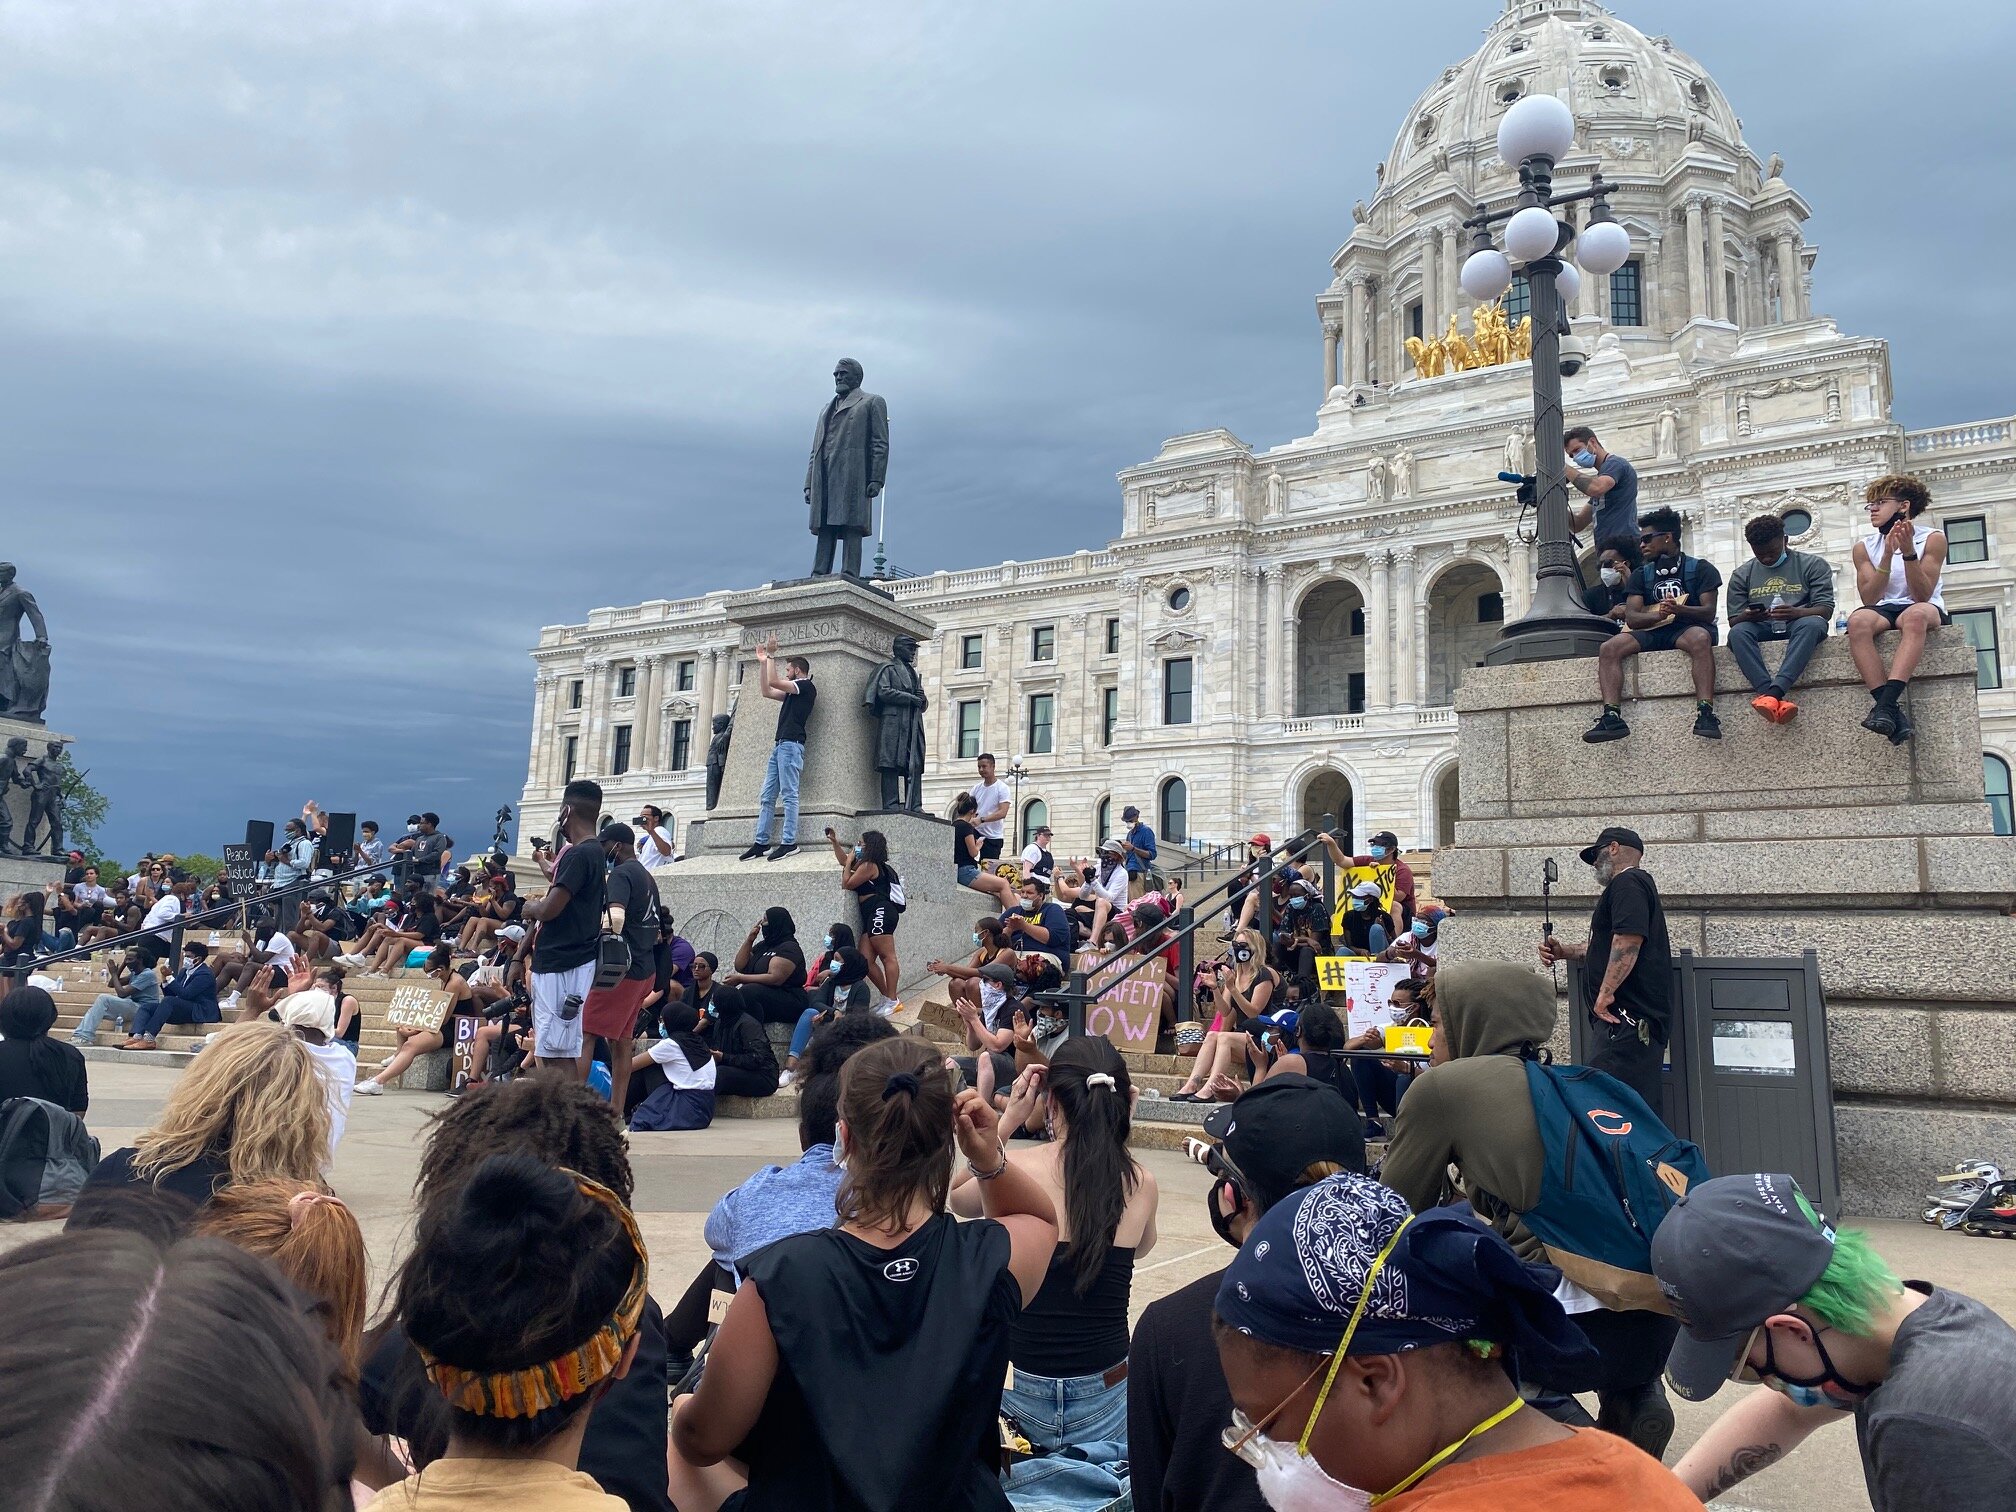  Protestors participated in a sit-in in front of the Minnesota State Capitol building in St. Paul, Minnesota on Tuesday, June 2, 2020.  Photo by: Amudalat Ajasa    